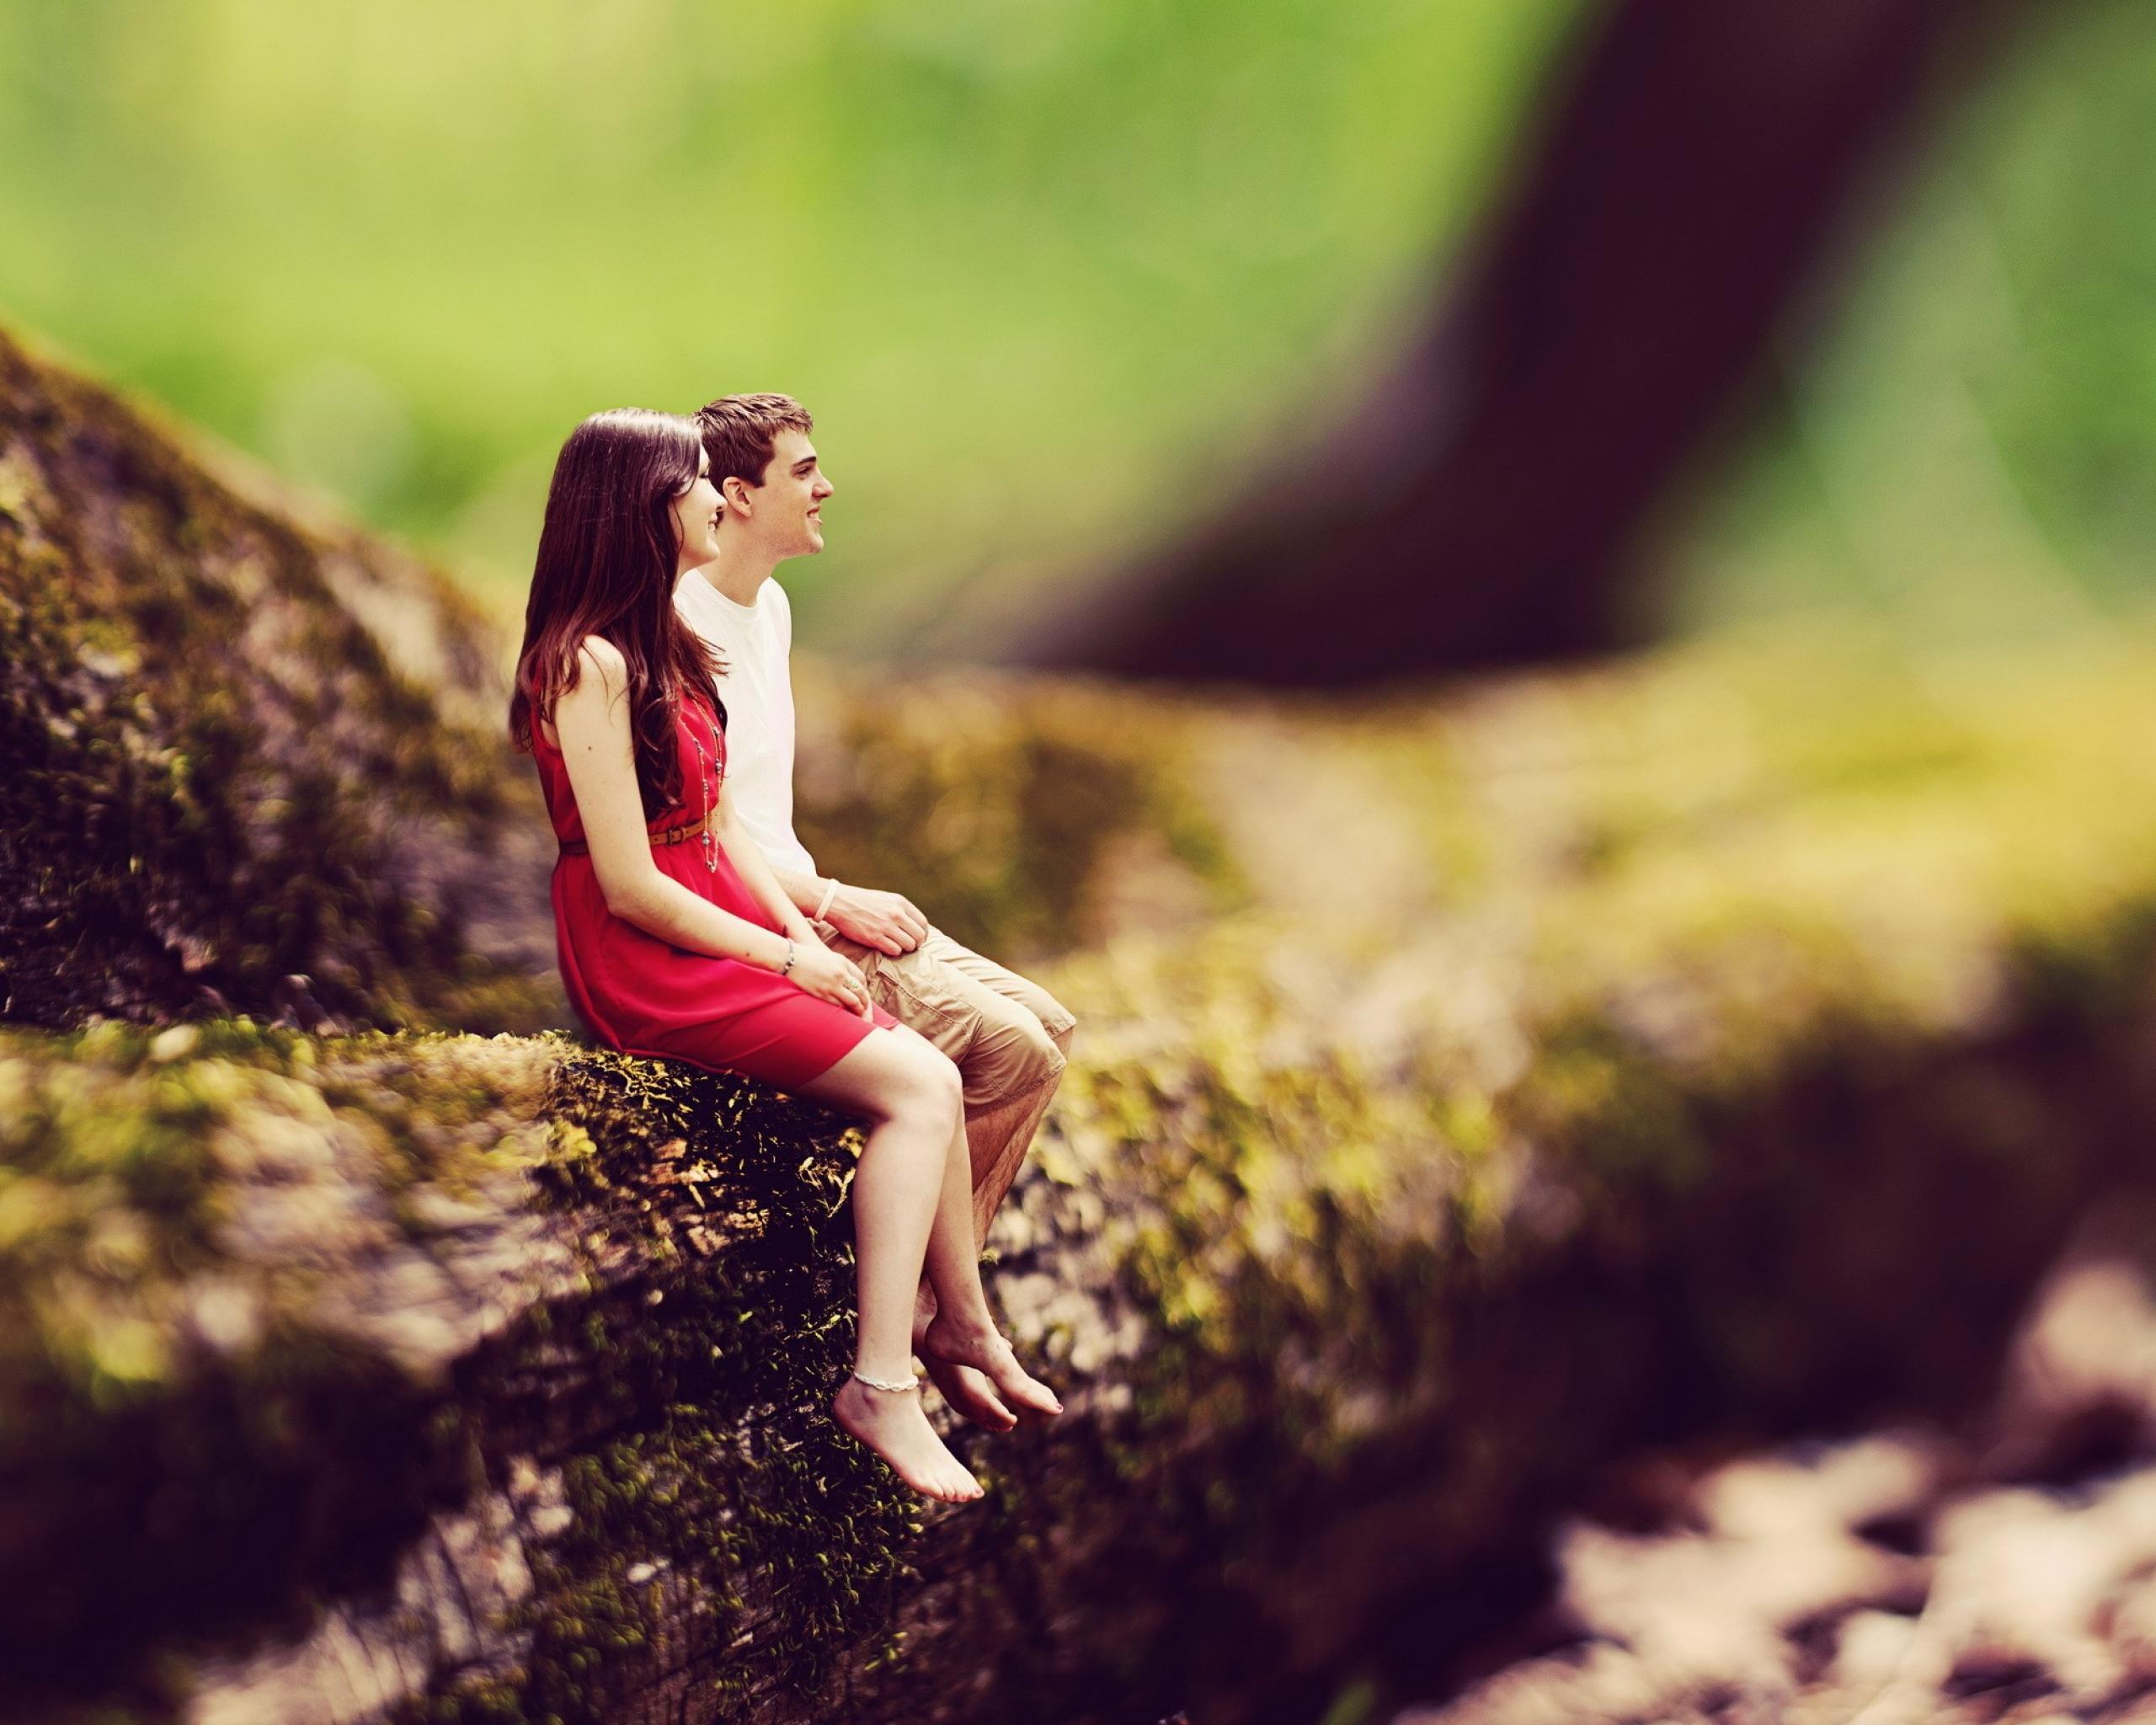 Image for Sad Boy And Girl Story About Love Wallpapers Free HD.